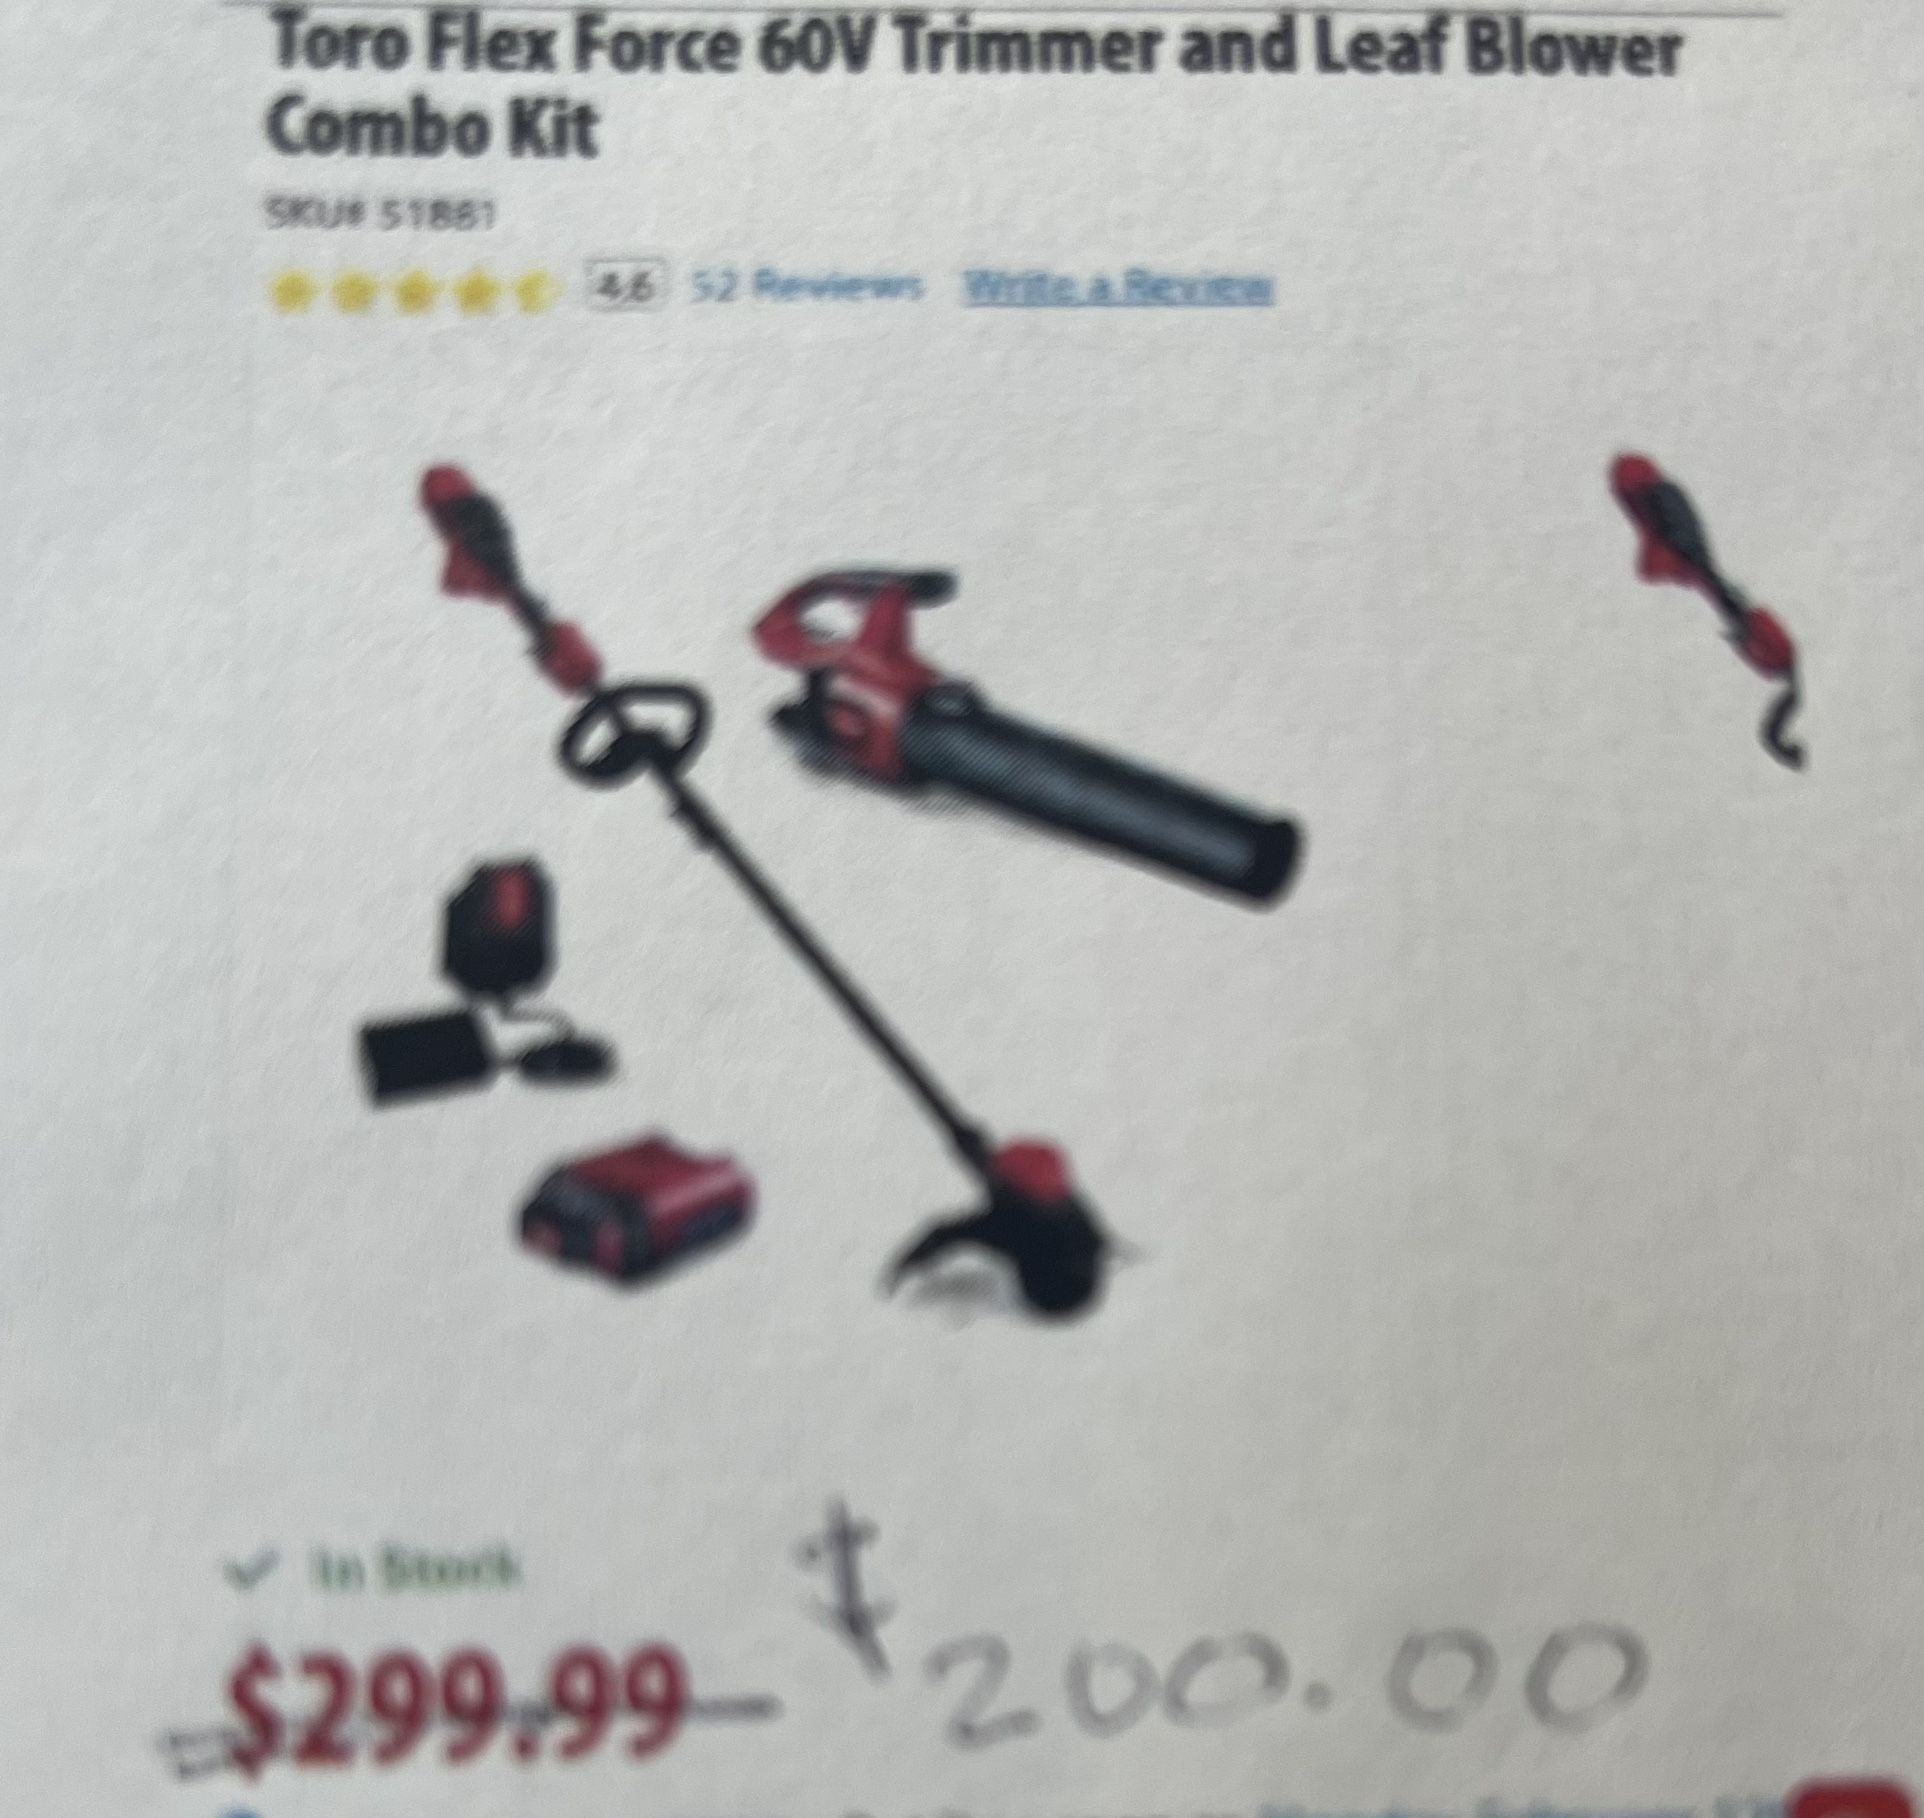 Toro Flex Force, 60 V Max Cordless Battery, Trimmer And Leaf Blower